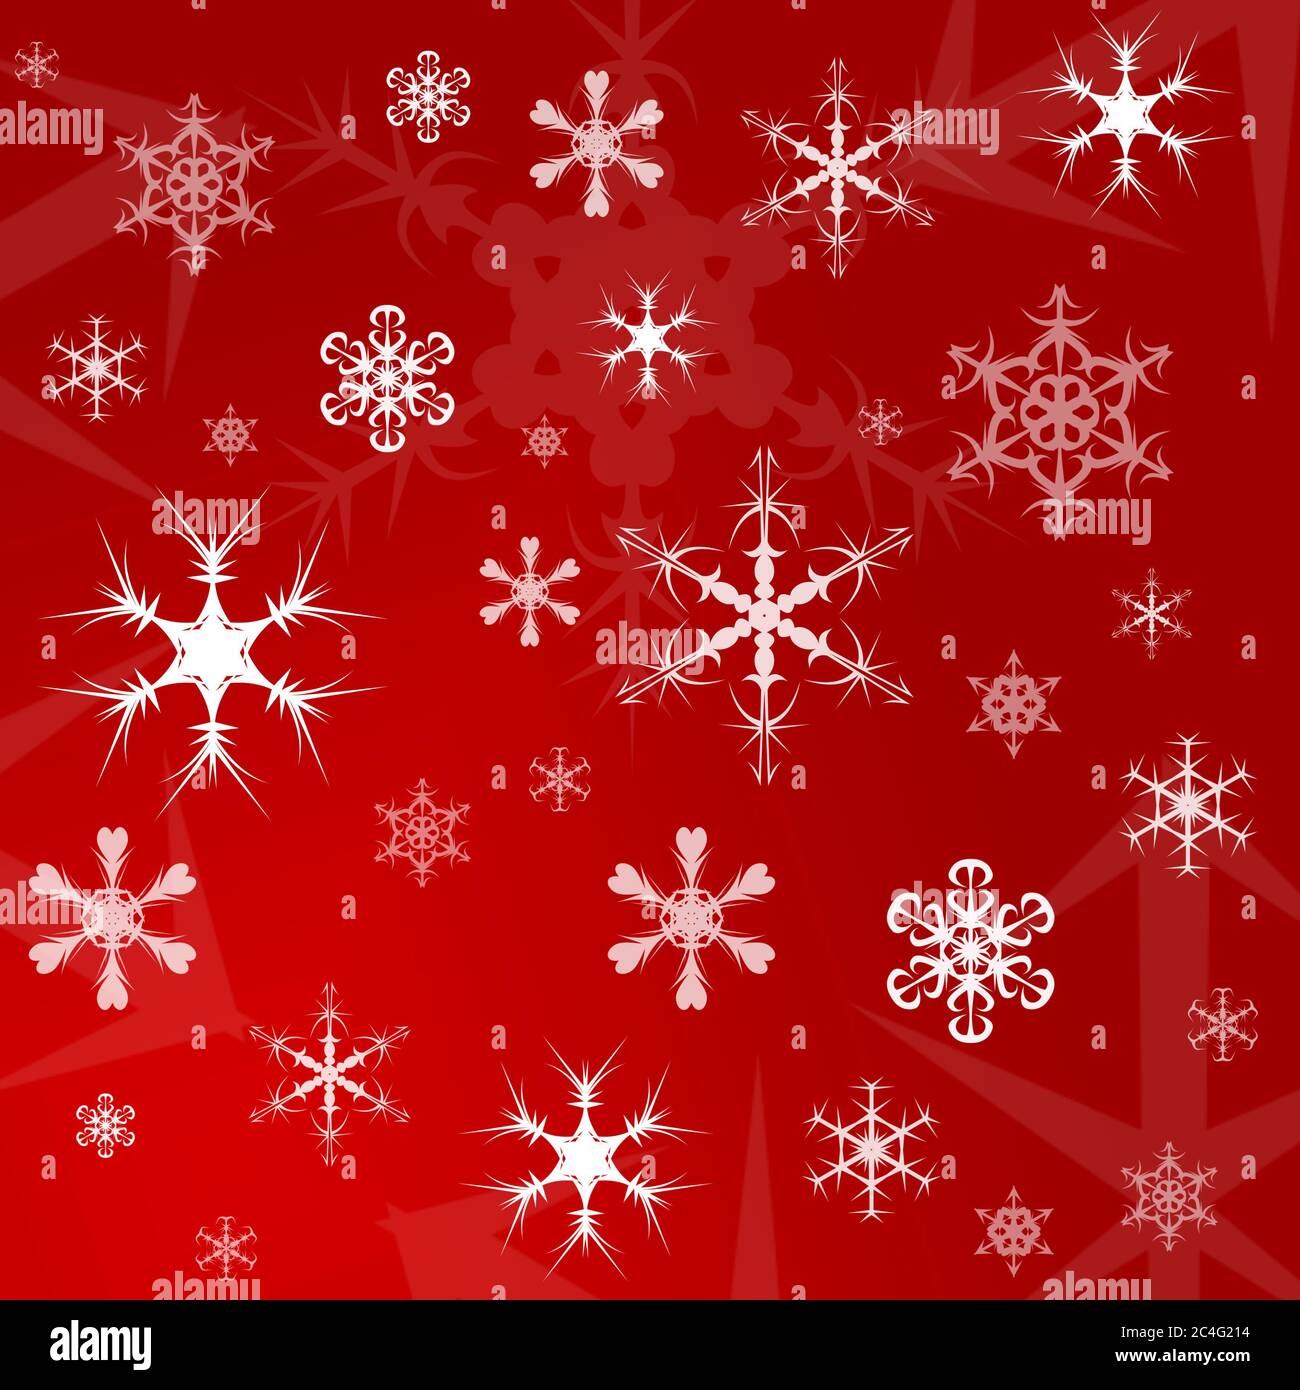 Christmas gift wrapping paper Stock Photo